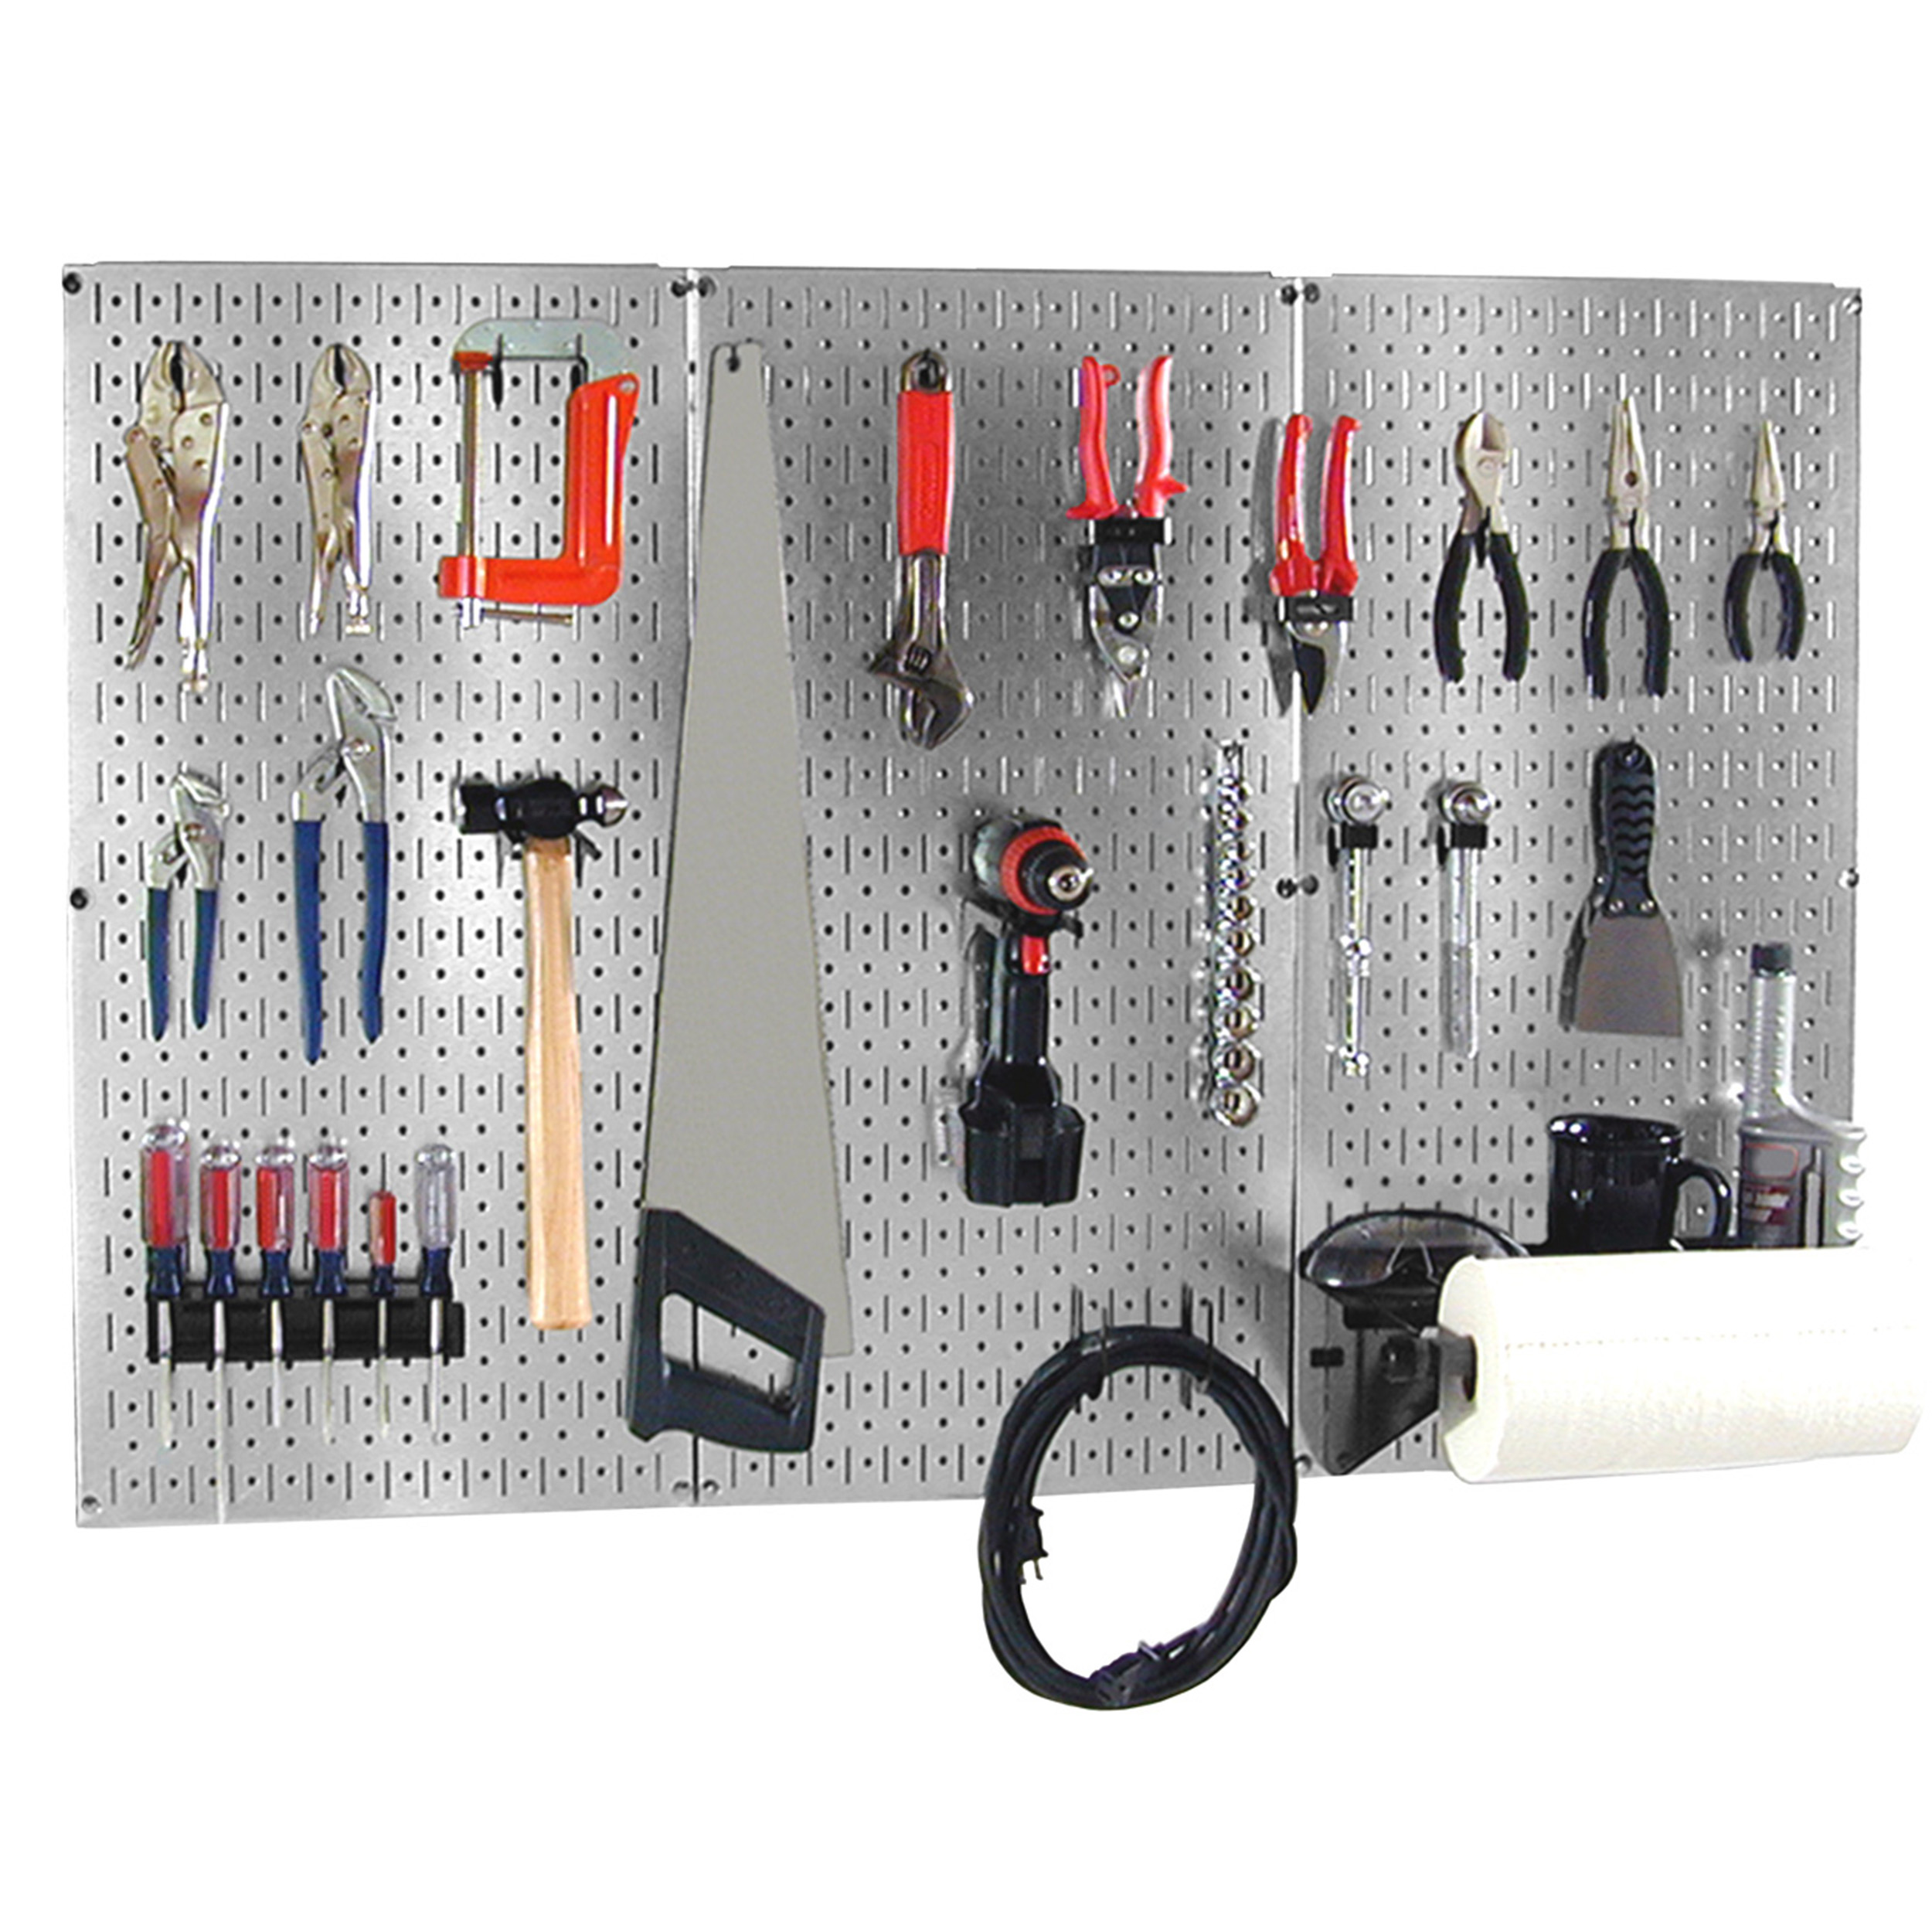 4 Ft Metal Pegboard Basic Tool Organizer Kit With Galvanized Toolboard And Black Accessories